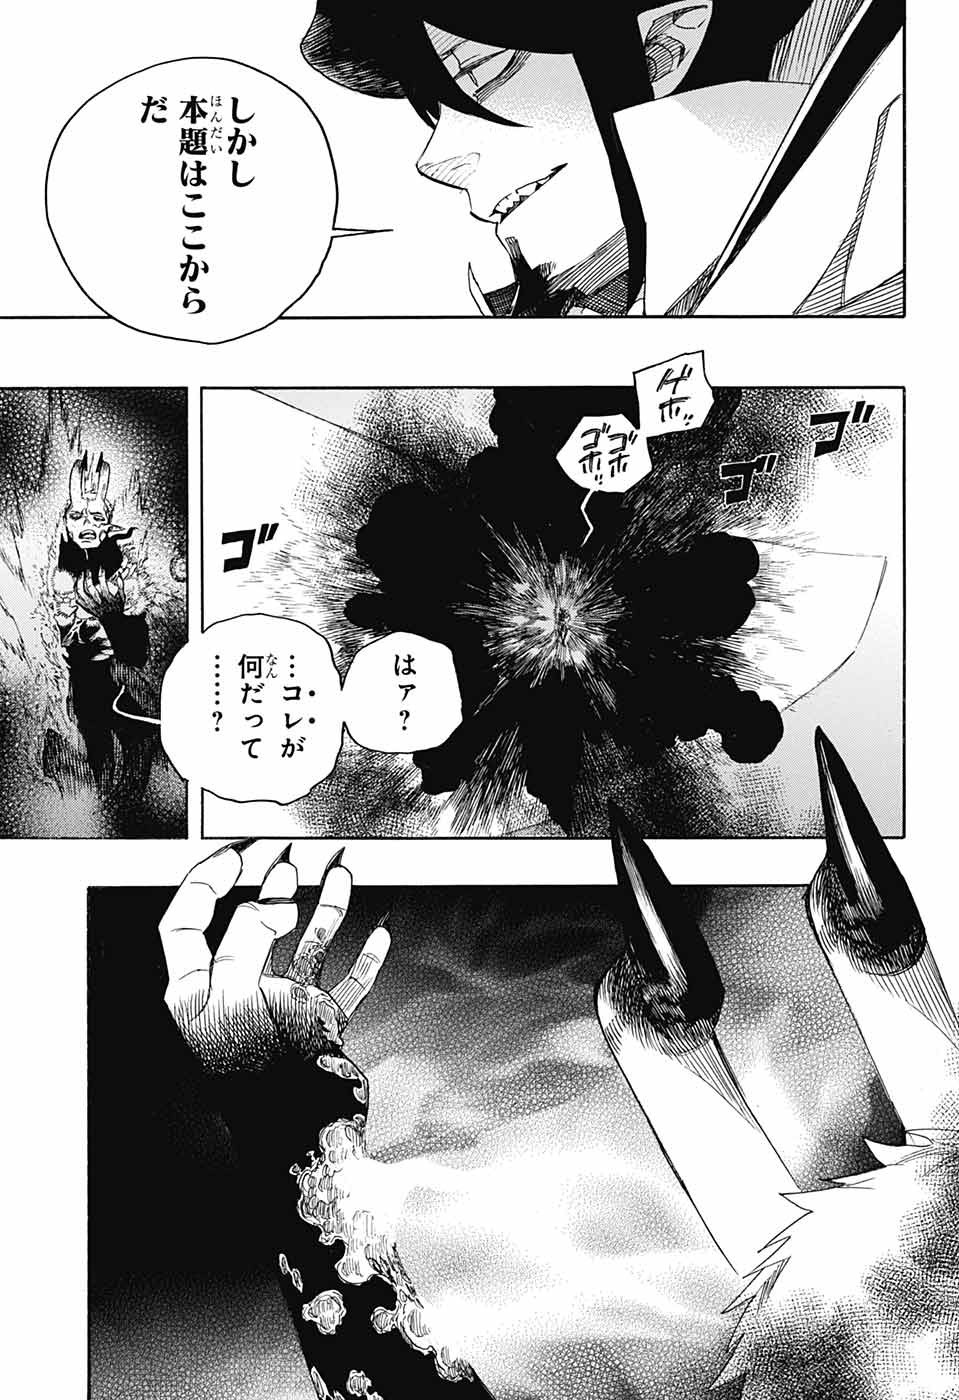 Ao no Exorcist - Chapter 137 - Page 3